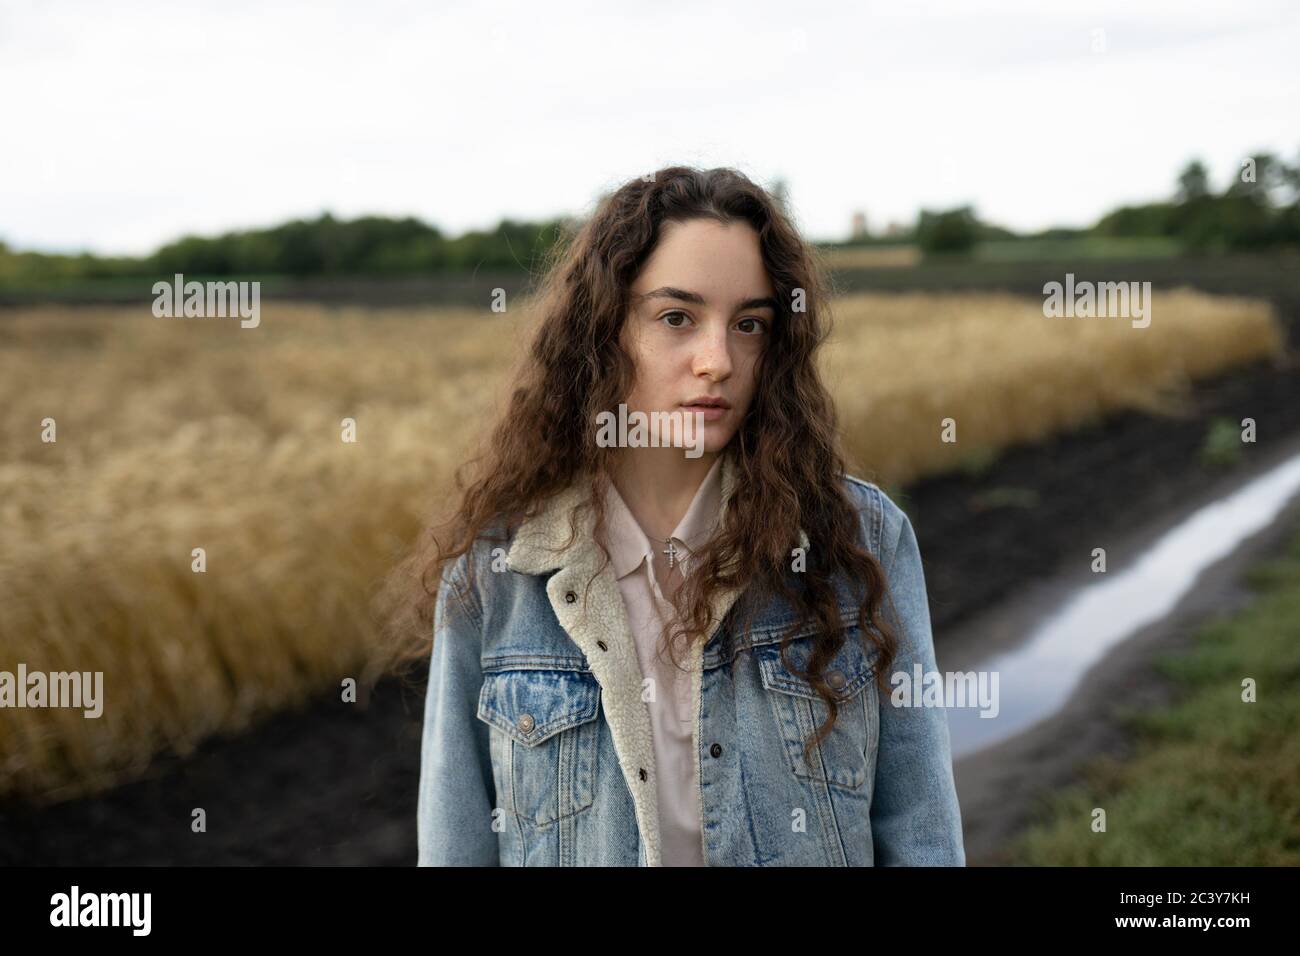 Russia, Omsk, Portrait of young woman with brown hair standing in field Stock Photo